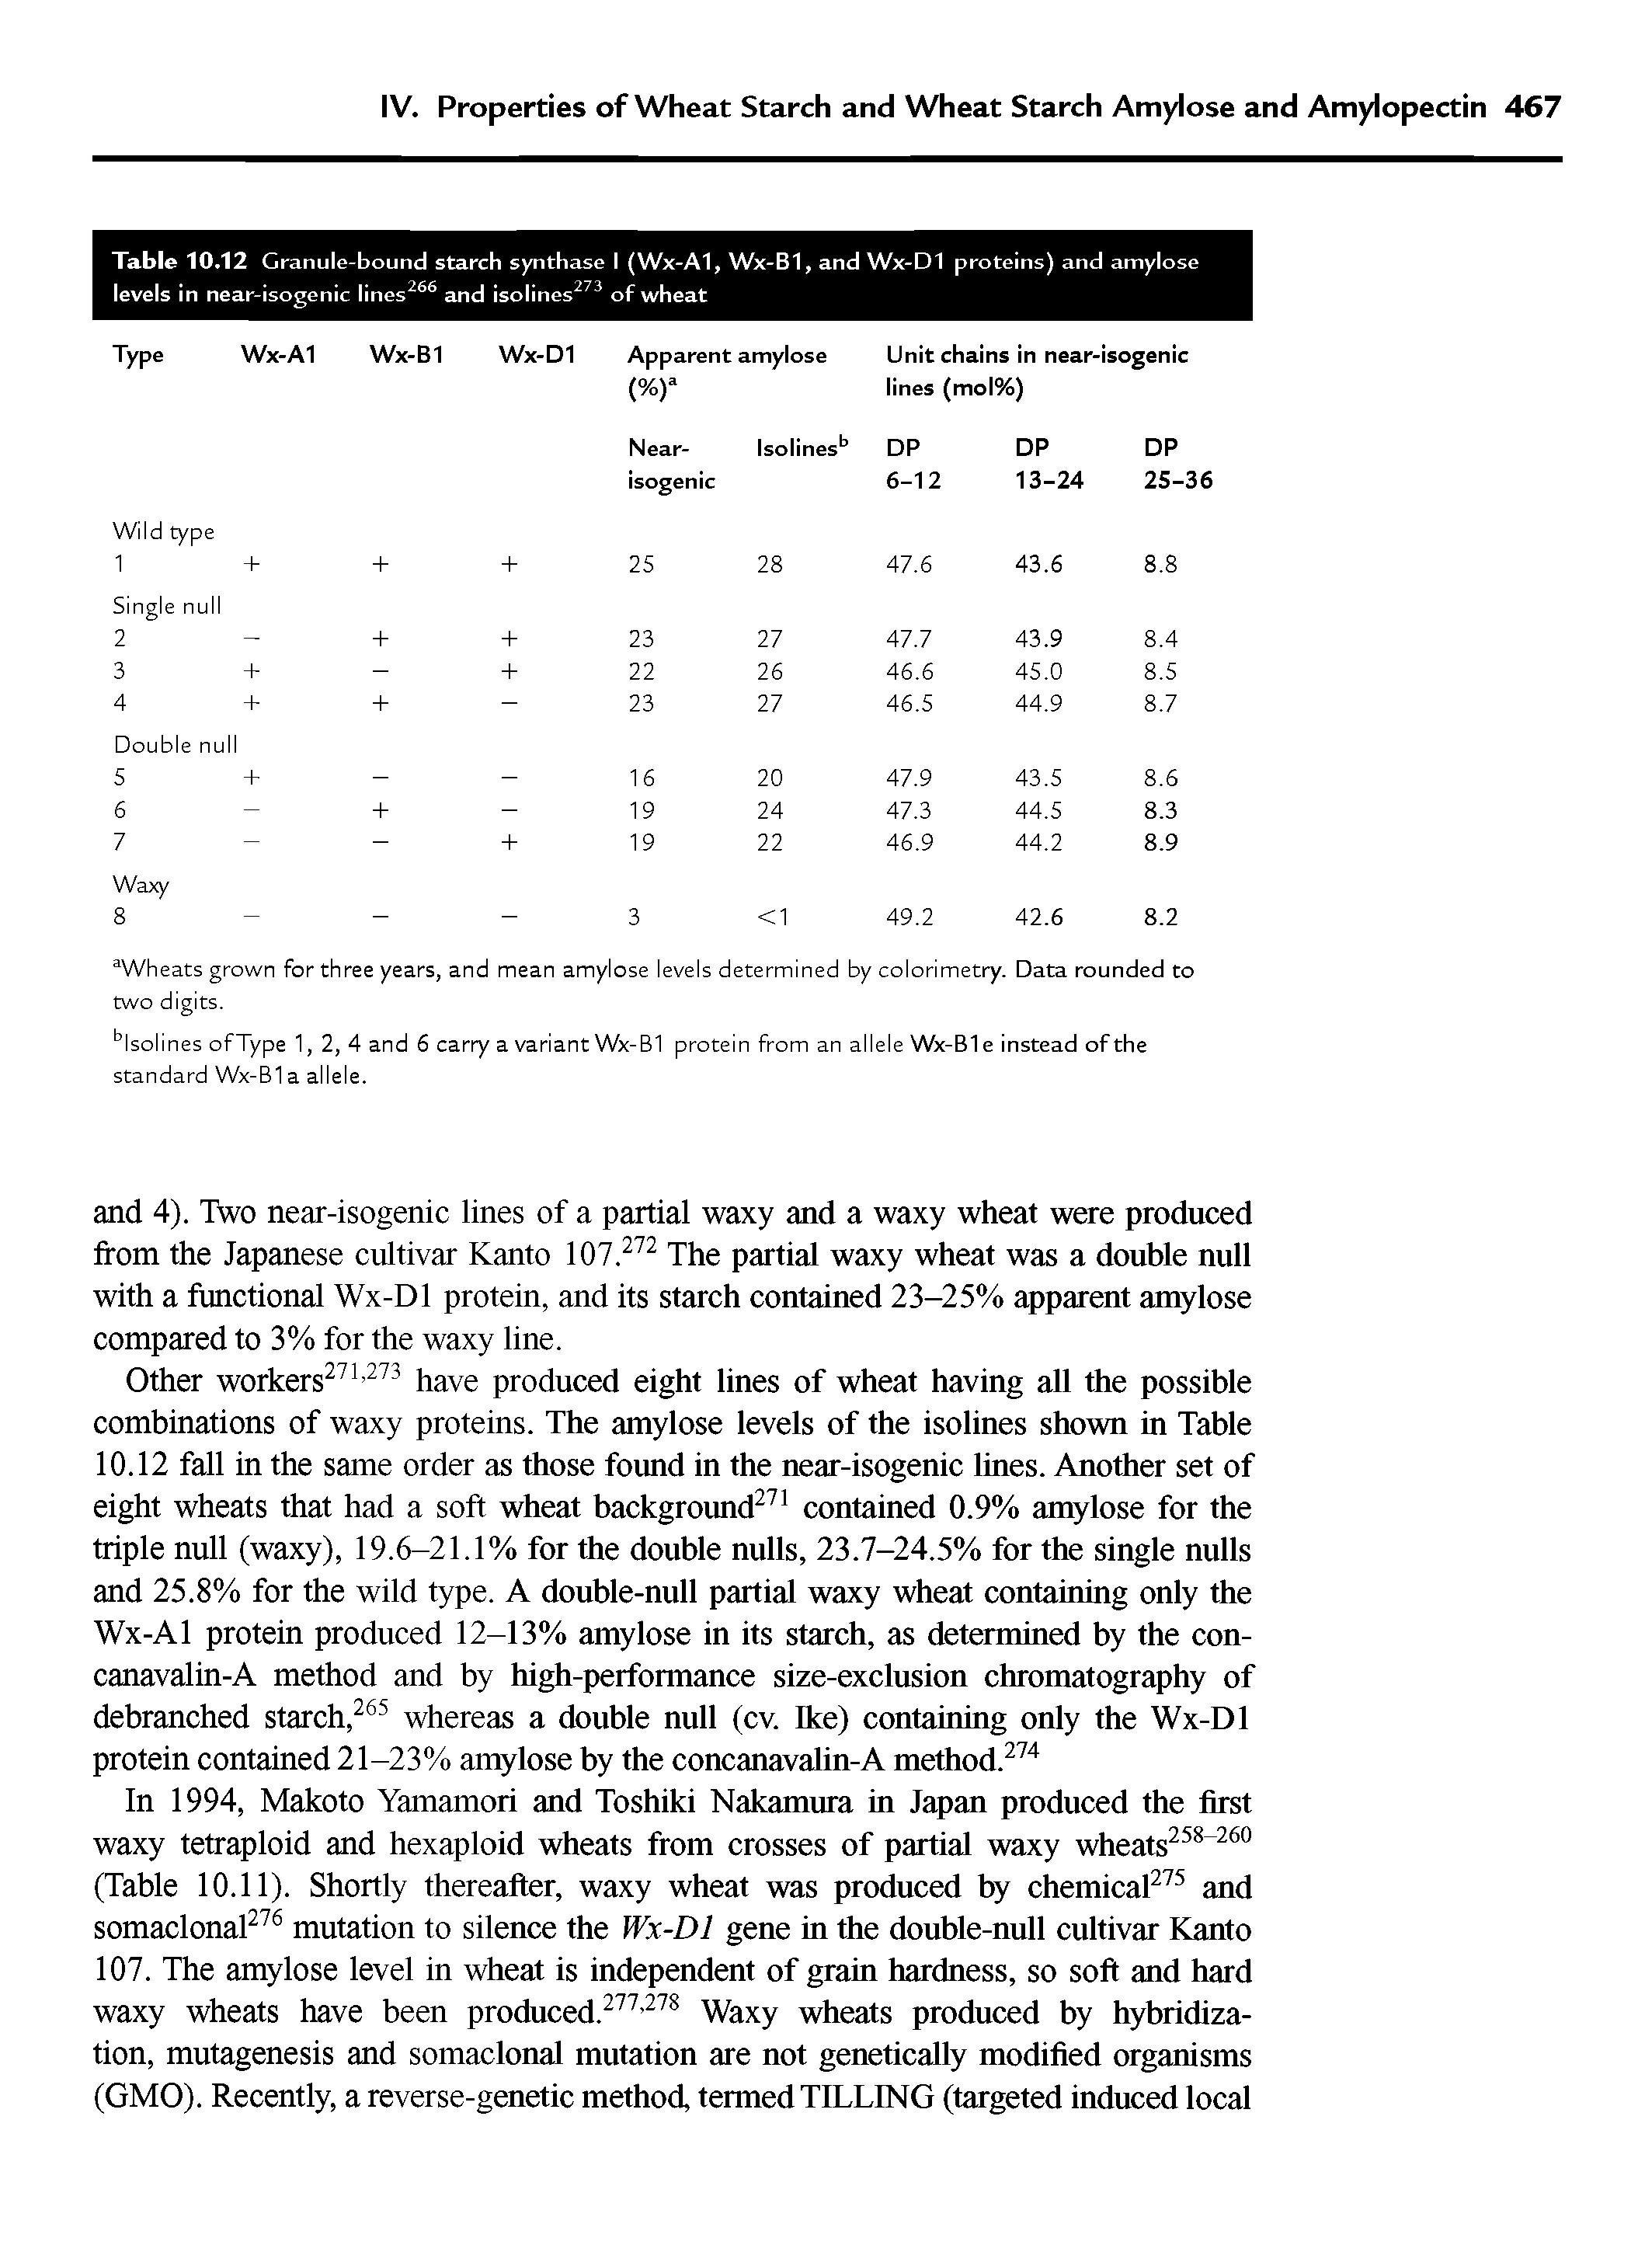 Table 10.12 Granule-bound starch synthase I (Wx-A1, Wx-B1, and Wx-D1 proteins) and amylose levels in near-isogenic lines266 and isolines273 of wheat...